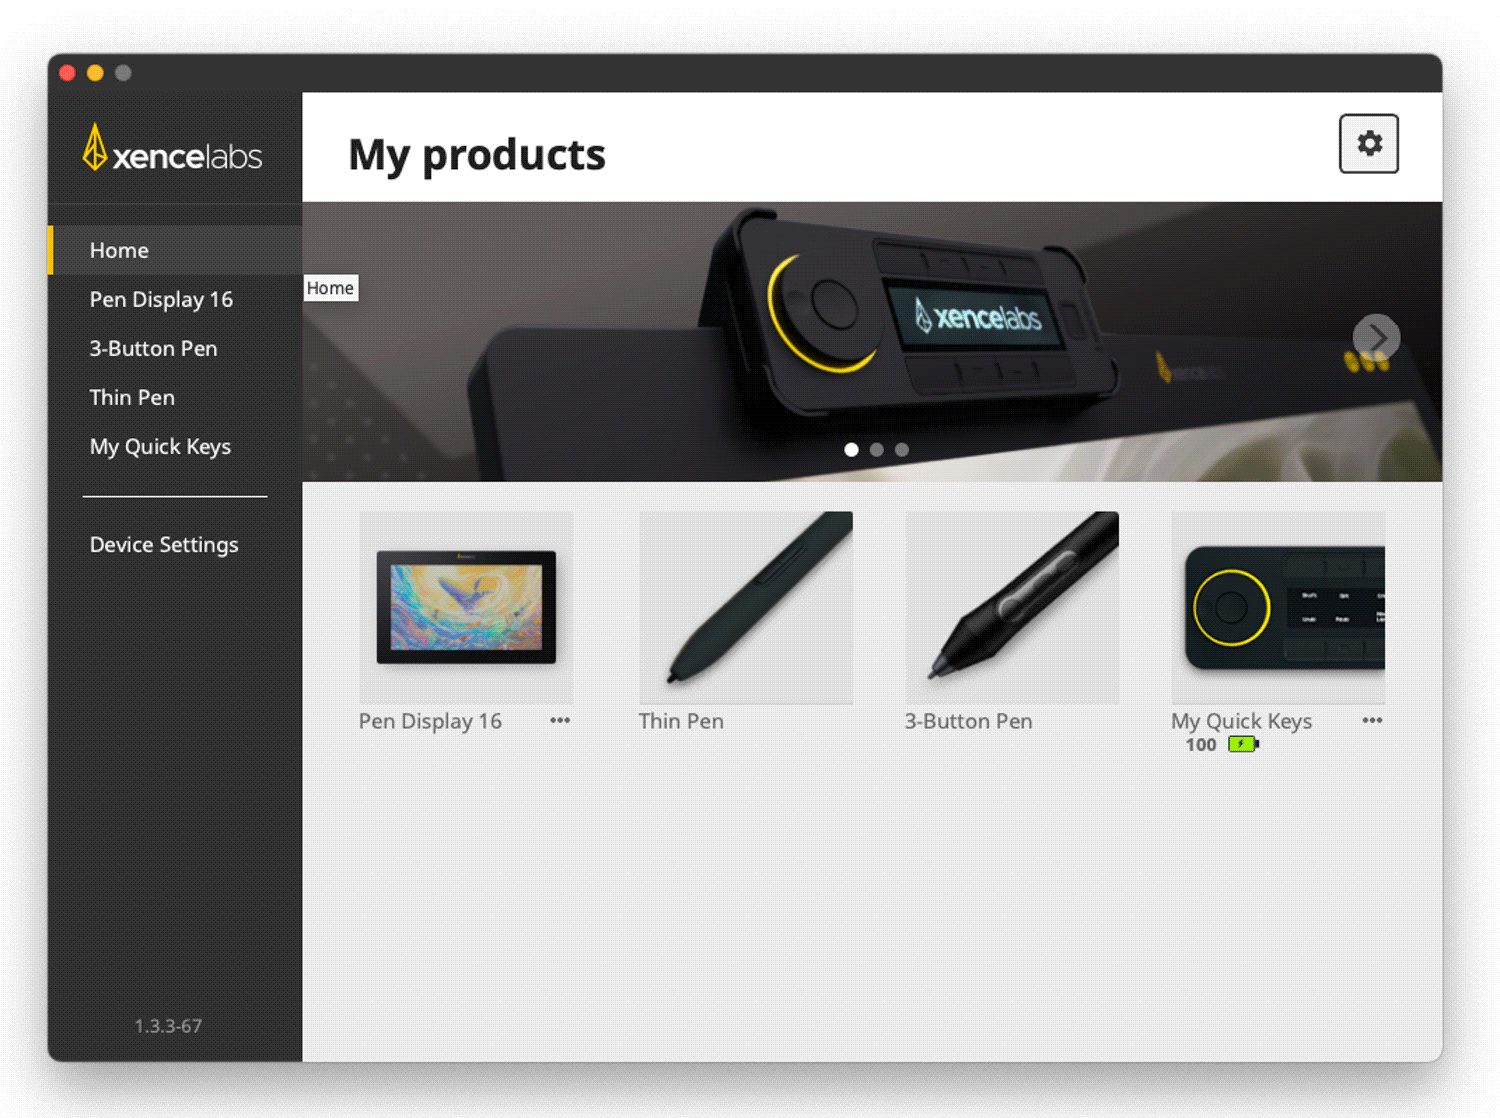 A digital interface displaying a "My products" page for Xencelabs devices. The sidebar shows menu options including Home, Pen Display 16, Thin Pen, 3-Button Pen, and My Quick Keys, with pictures of each product. The main section includes images and names of these products.